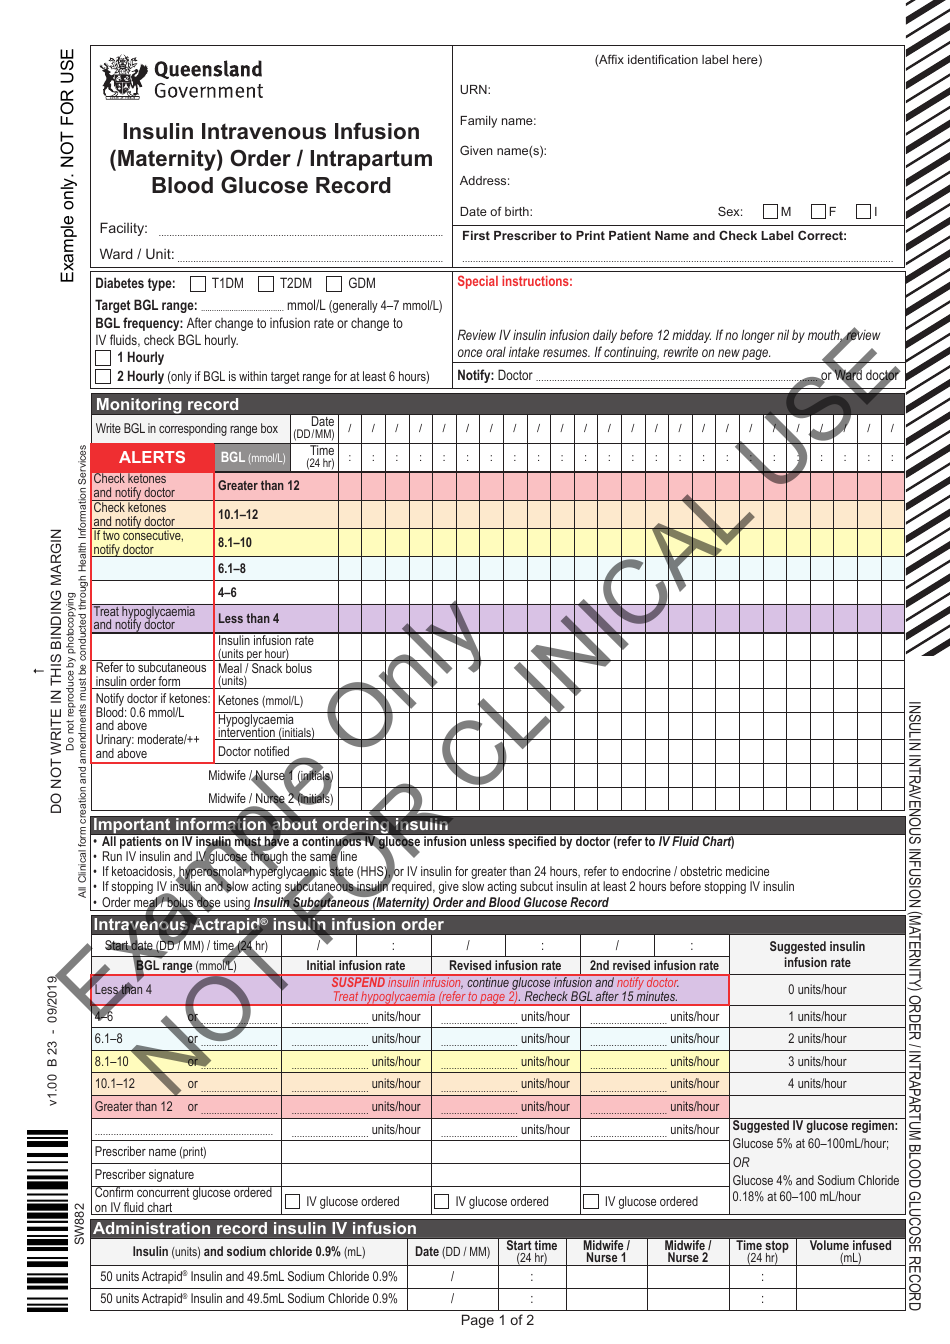 Insulin Intravenous Infusion (Maternity) Order / Intrapartum Blood Glucose Record - Example - Queensland, Australia, Page 1